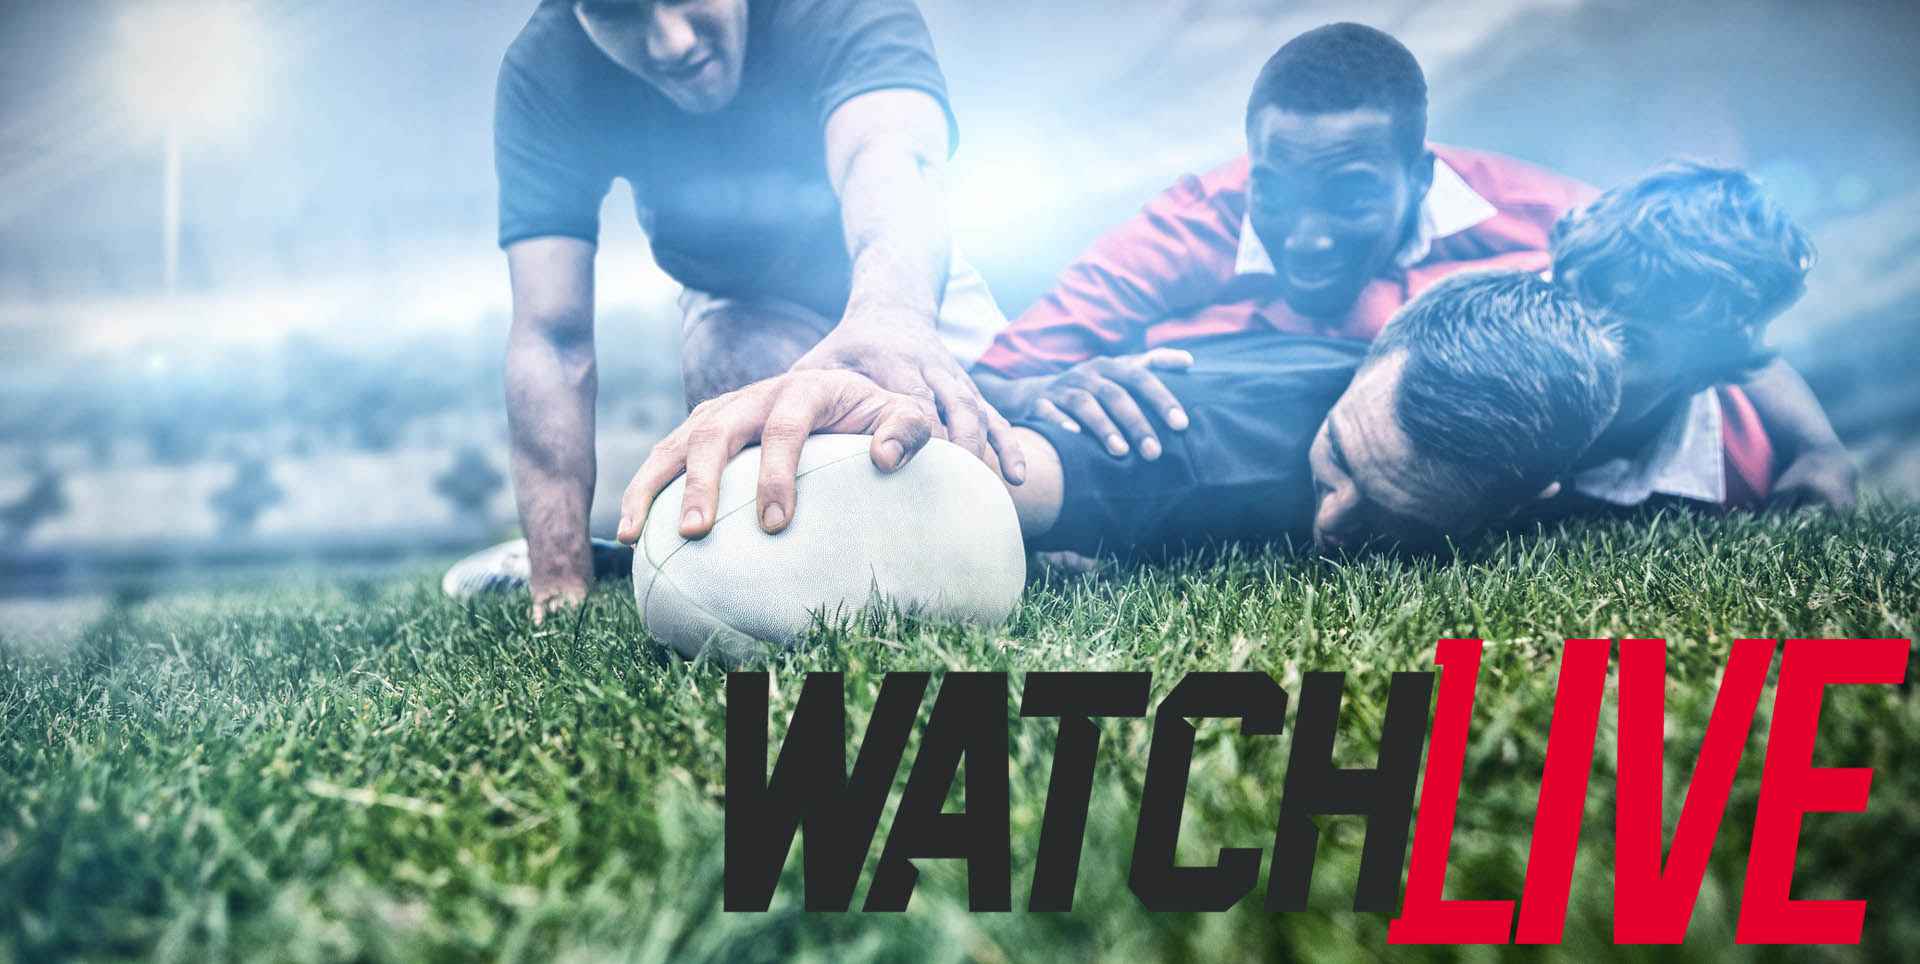 Italy Rugby World Cup Team 2019 Live Stream